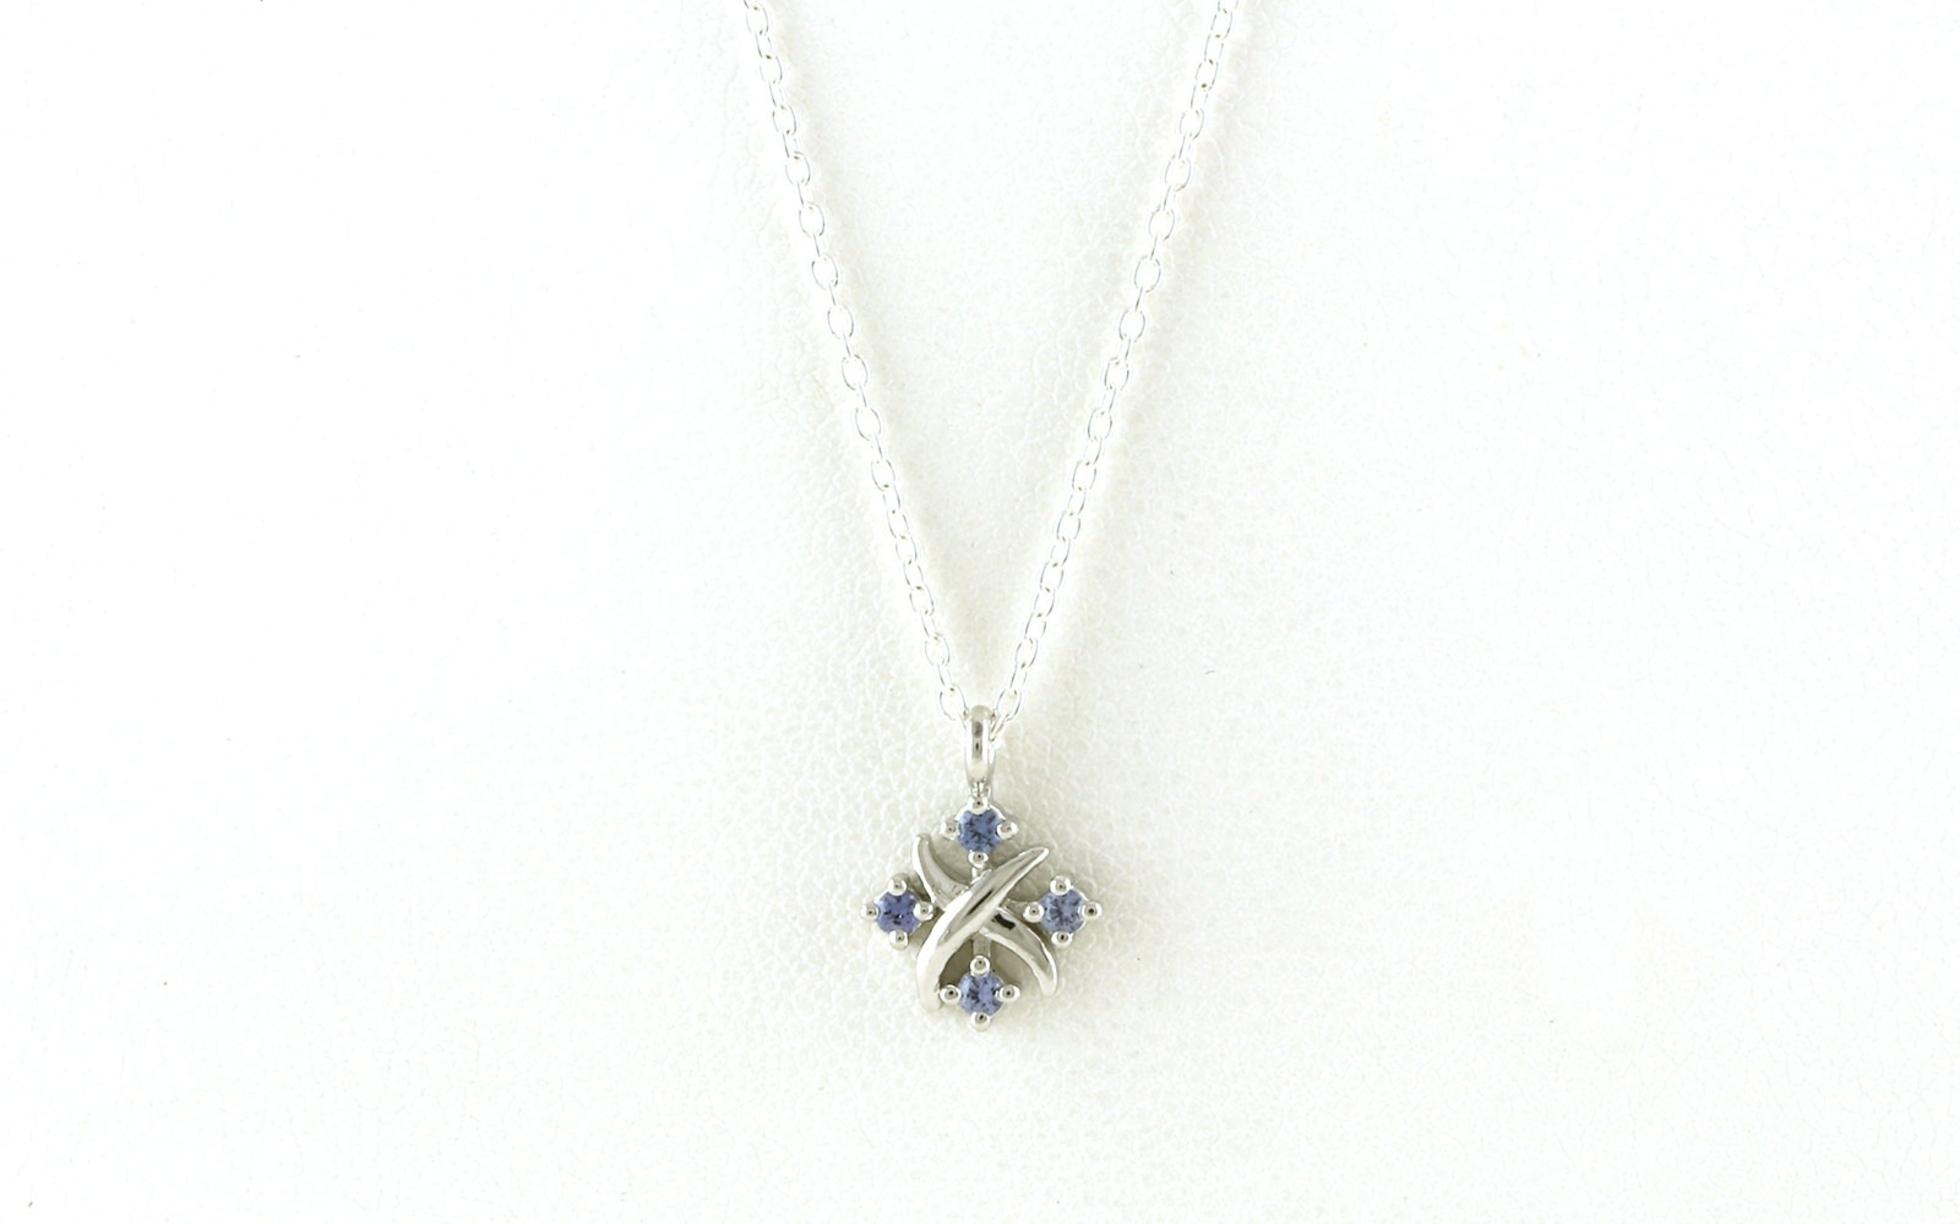 4-Stone X-Design Montana Yogo Sapphire Necklace in Sterling Silver (0.12cts TWT)